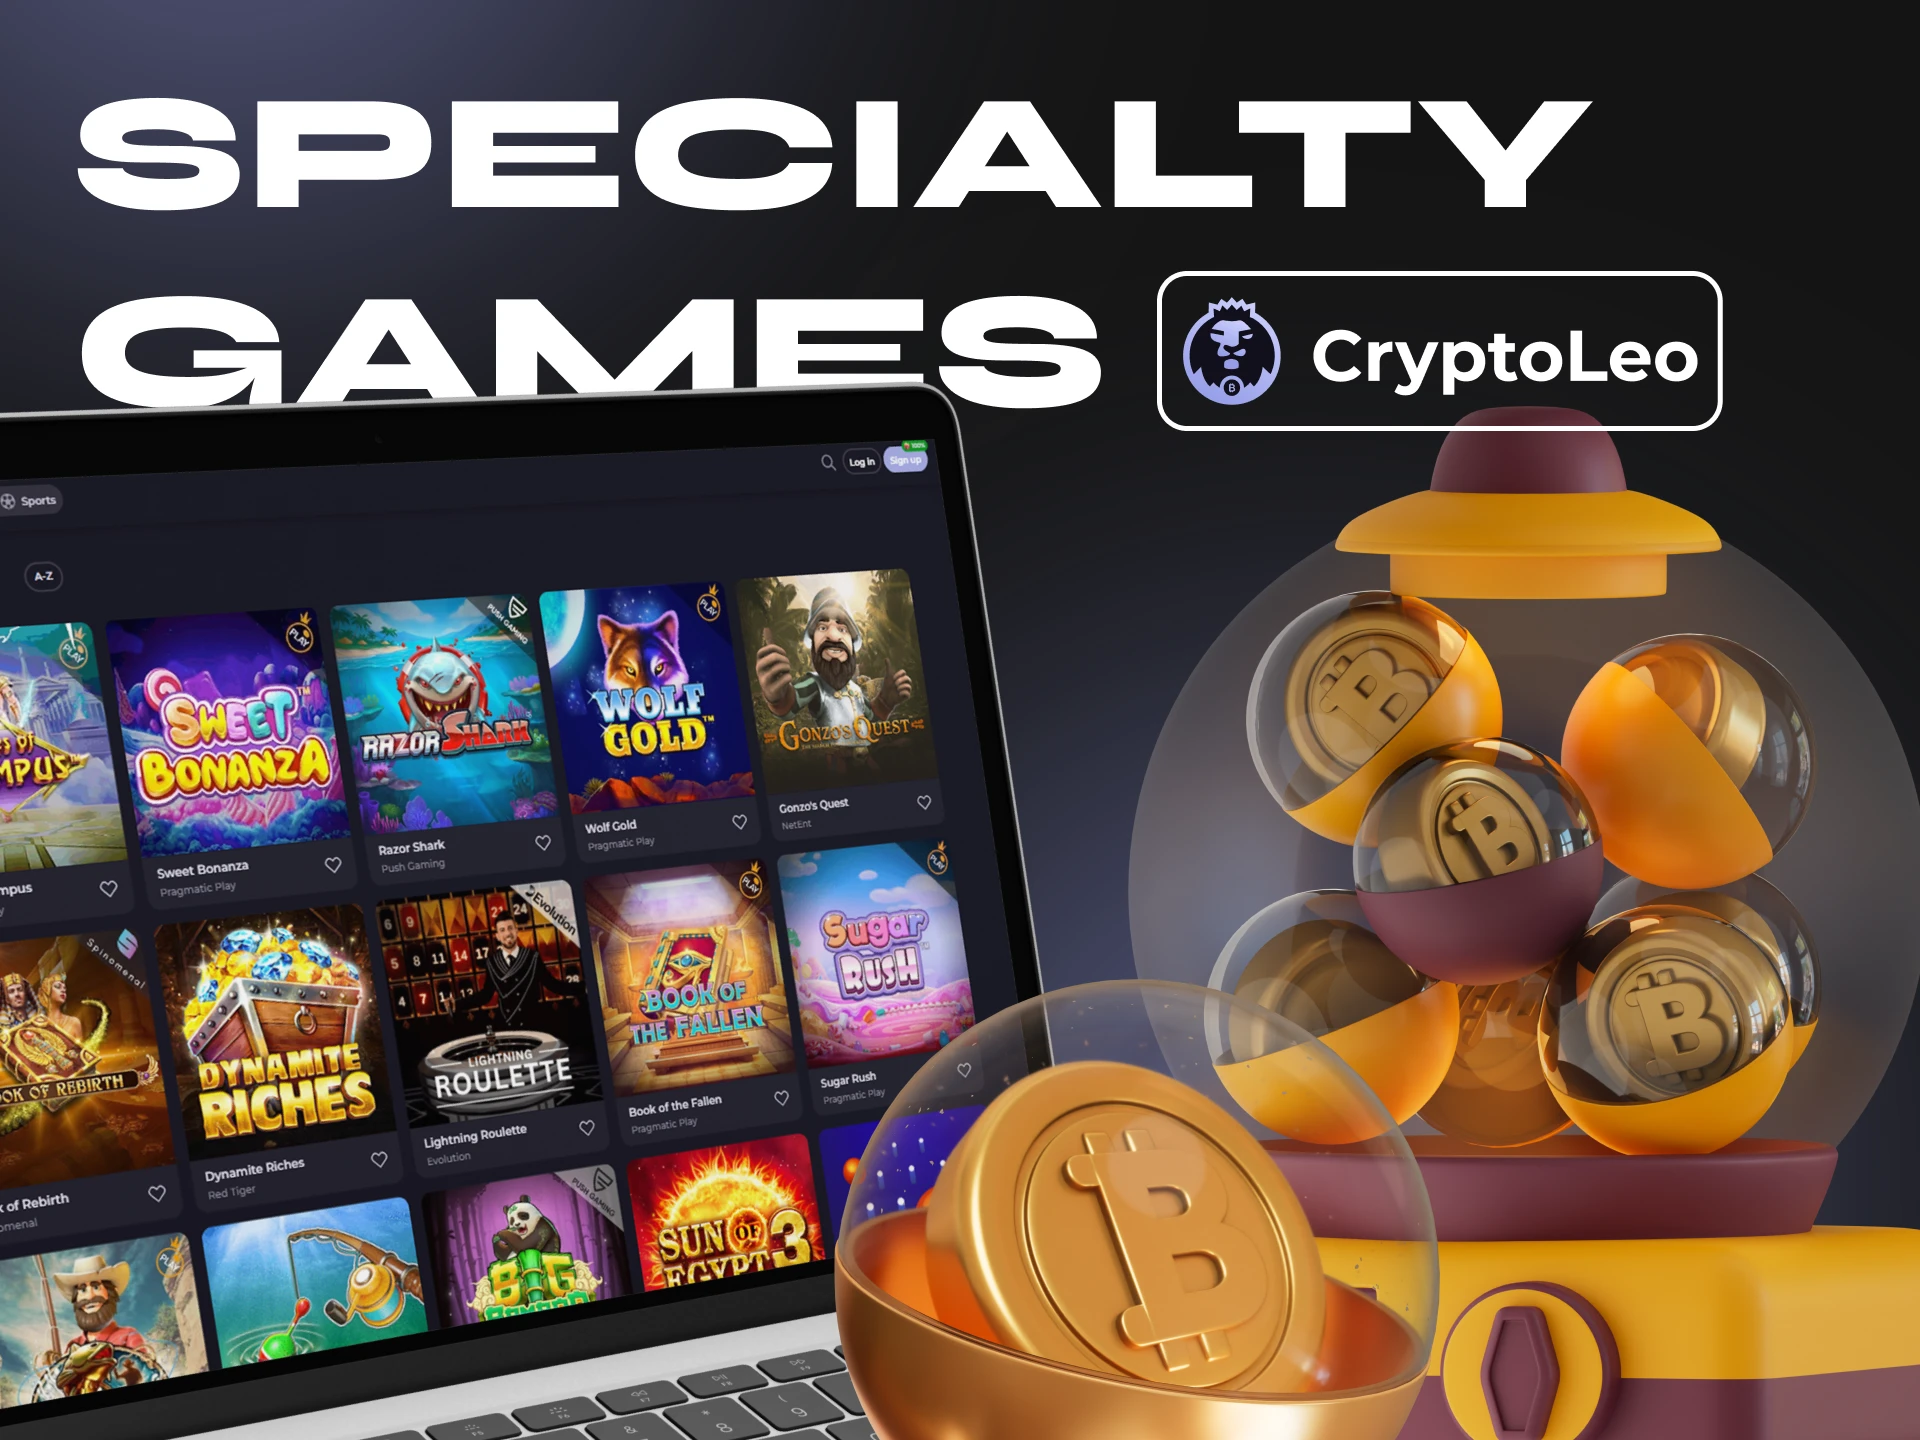 Cryptoleo offers a large selection of games for every taste.